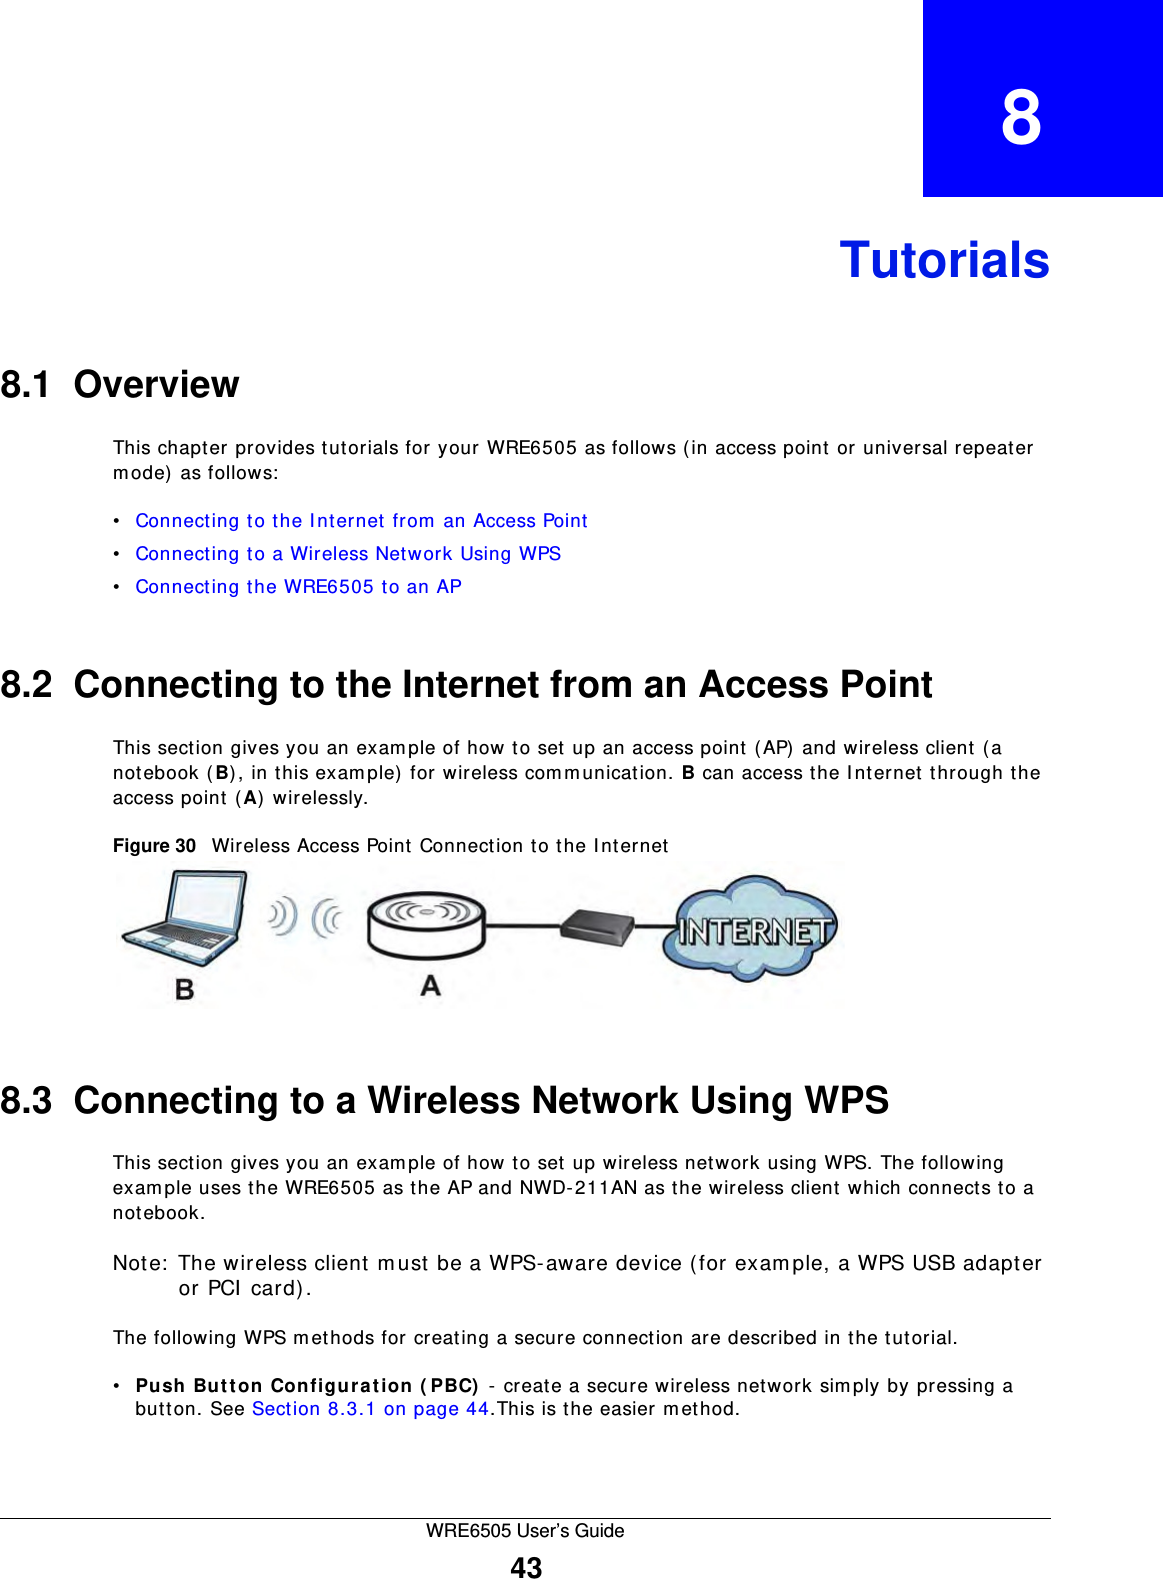 WRE6505 User’s Guide43CHAPTER   8Tutorials8.1  OverviewThis chapter provides tutorials for your WRE6505 as follows ( in access point or universal repeater mode) as follows:•Connecting to the I nternet from  an Access Point•Connecting to a Wireless Network Using WPS•Connecting the WRE6505 to an AP8.2  Connecting to the Internet from an Access PointThis section gives you an example of how to set up an access point (AP) and wireless client (a notebook (B), in this exam ple) for wireless communication. B can access the I nternet through the access point (A) wirelessly.Figure 30   Wireless Access Point Connection to the I nternet8.3  Connecting to a Wireless Network Using WPSThis section gives you an example of how to set up wireless network using WPS. The following example uses the WRE6505 as the AP and NWD-211AN as the wireless client which connects to a notebook. Note:  The wireless client m ust be a WPS-aware device (for example, a WPS USB adapter or PCI  card).The following WPS m ethods for creating a secure connection are described in the tutorial.•Push  But t on  Configura t ion ( PBC)  - create a secure wireless network simply by pressing a button. See Section 8.3.1 on page 44.This is the easier m ethod.